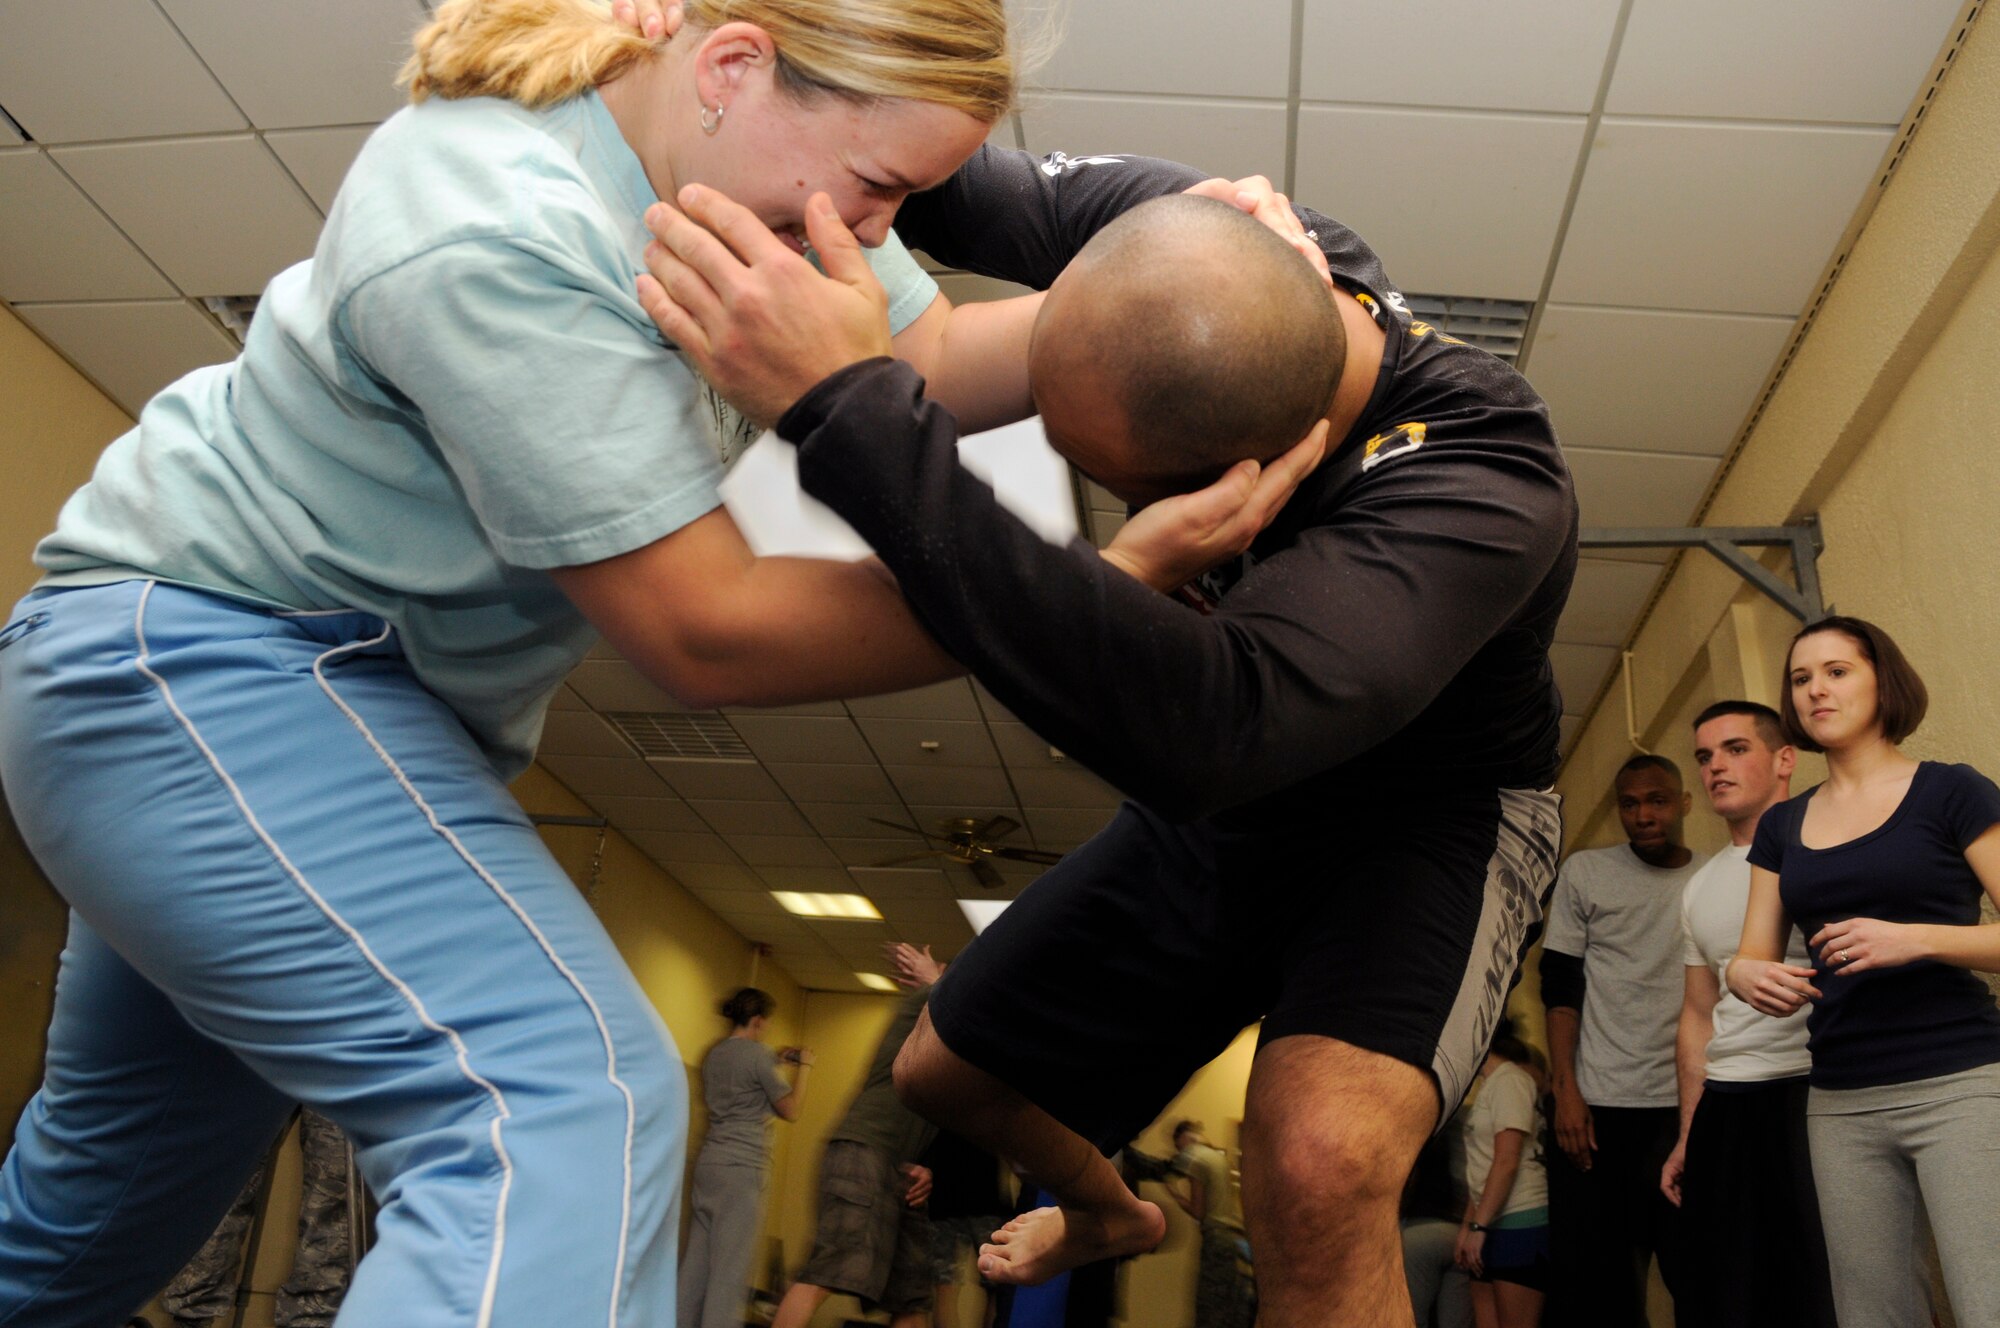 SPANGDAHLEM AIR BASE, Germany – Schawann McGee, wife of Capt. Barry McGee, 52nd Operations Support Squadron, throws Jesus Carlos, husband of Staff Sgt. Leonor Carlos, 52nd Medical Operations Squadron, to the ground during a self-defense course at Skelton Memorial Fitness Center March 26. This class was among many events focused on preventing sexual assault during Sexual Assault Awareness Month. (U.S. Air Force photo/Senior Airman Benjamin Wilson)